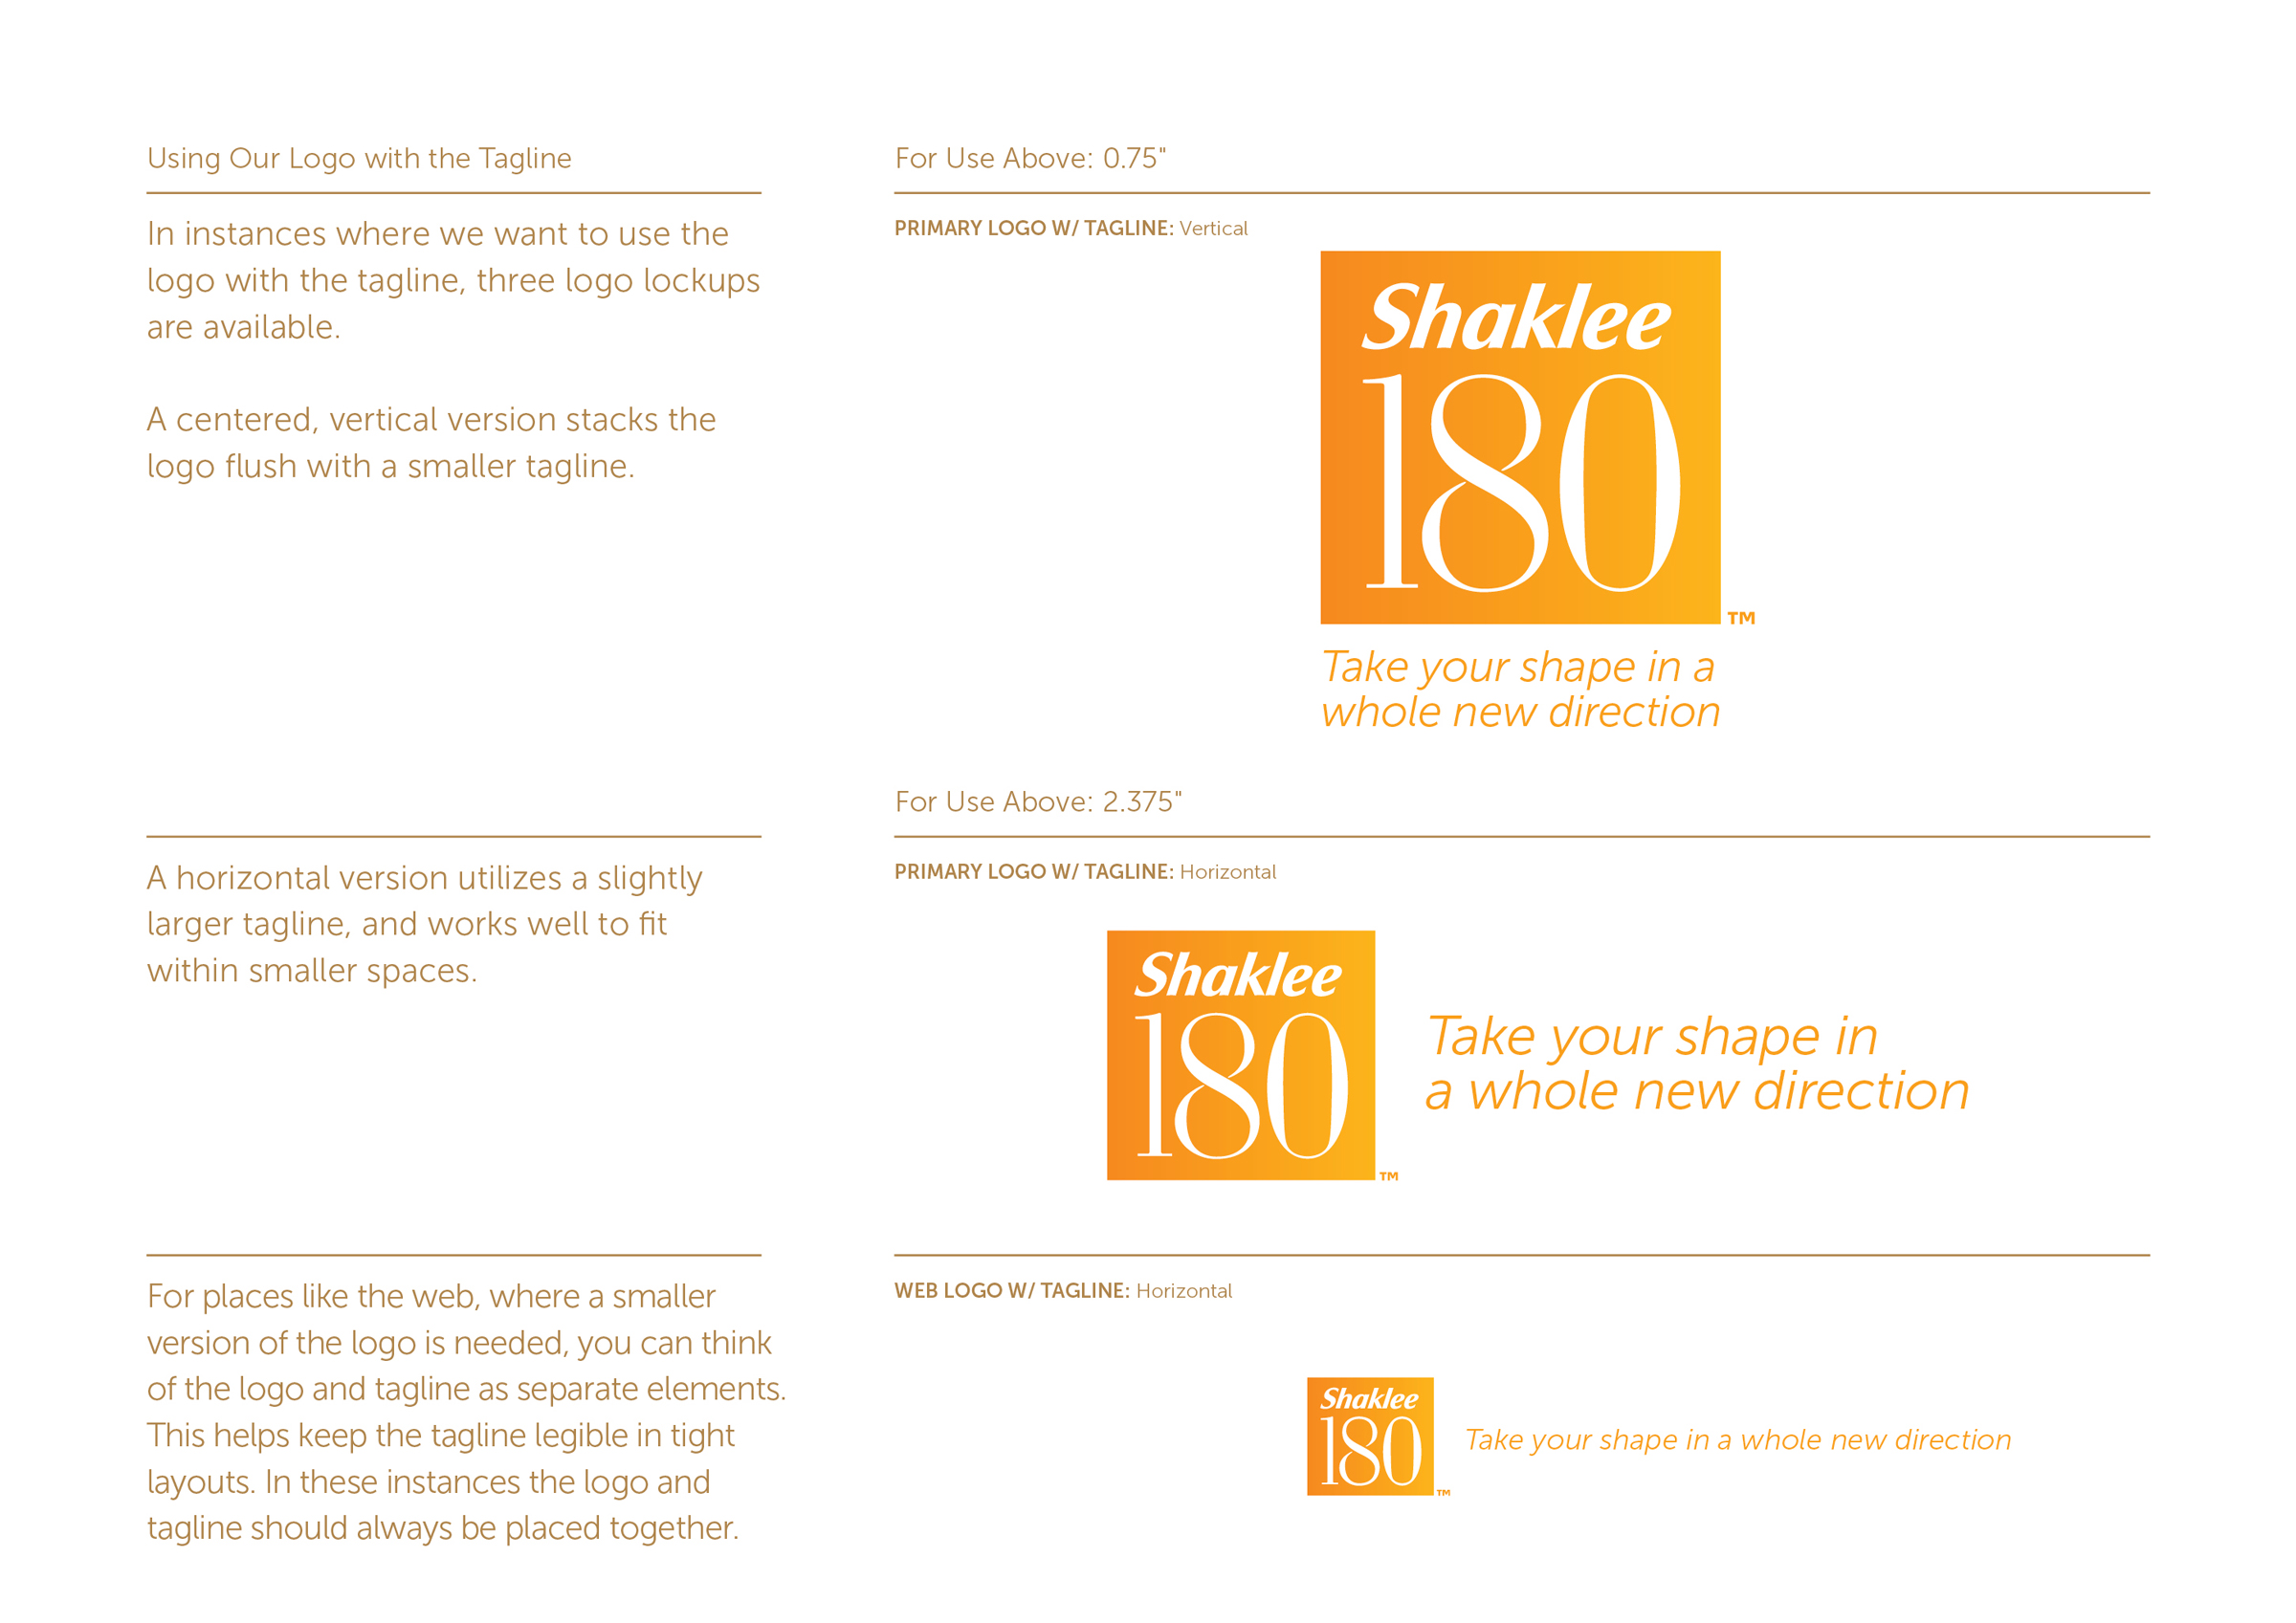 Shaklee180_Style_Guide12